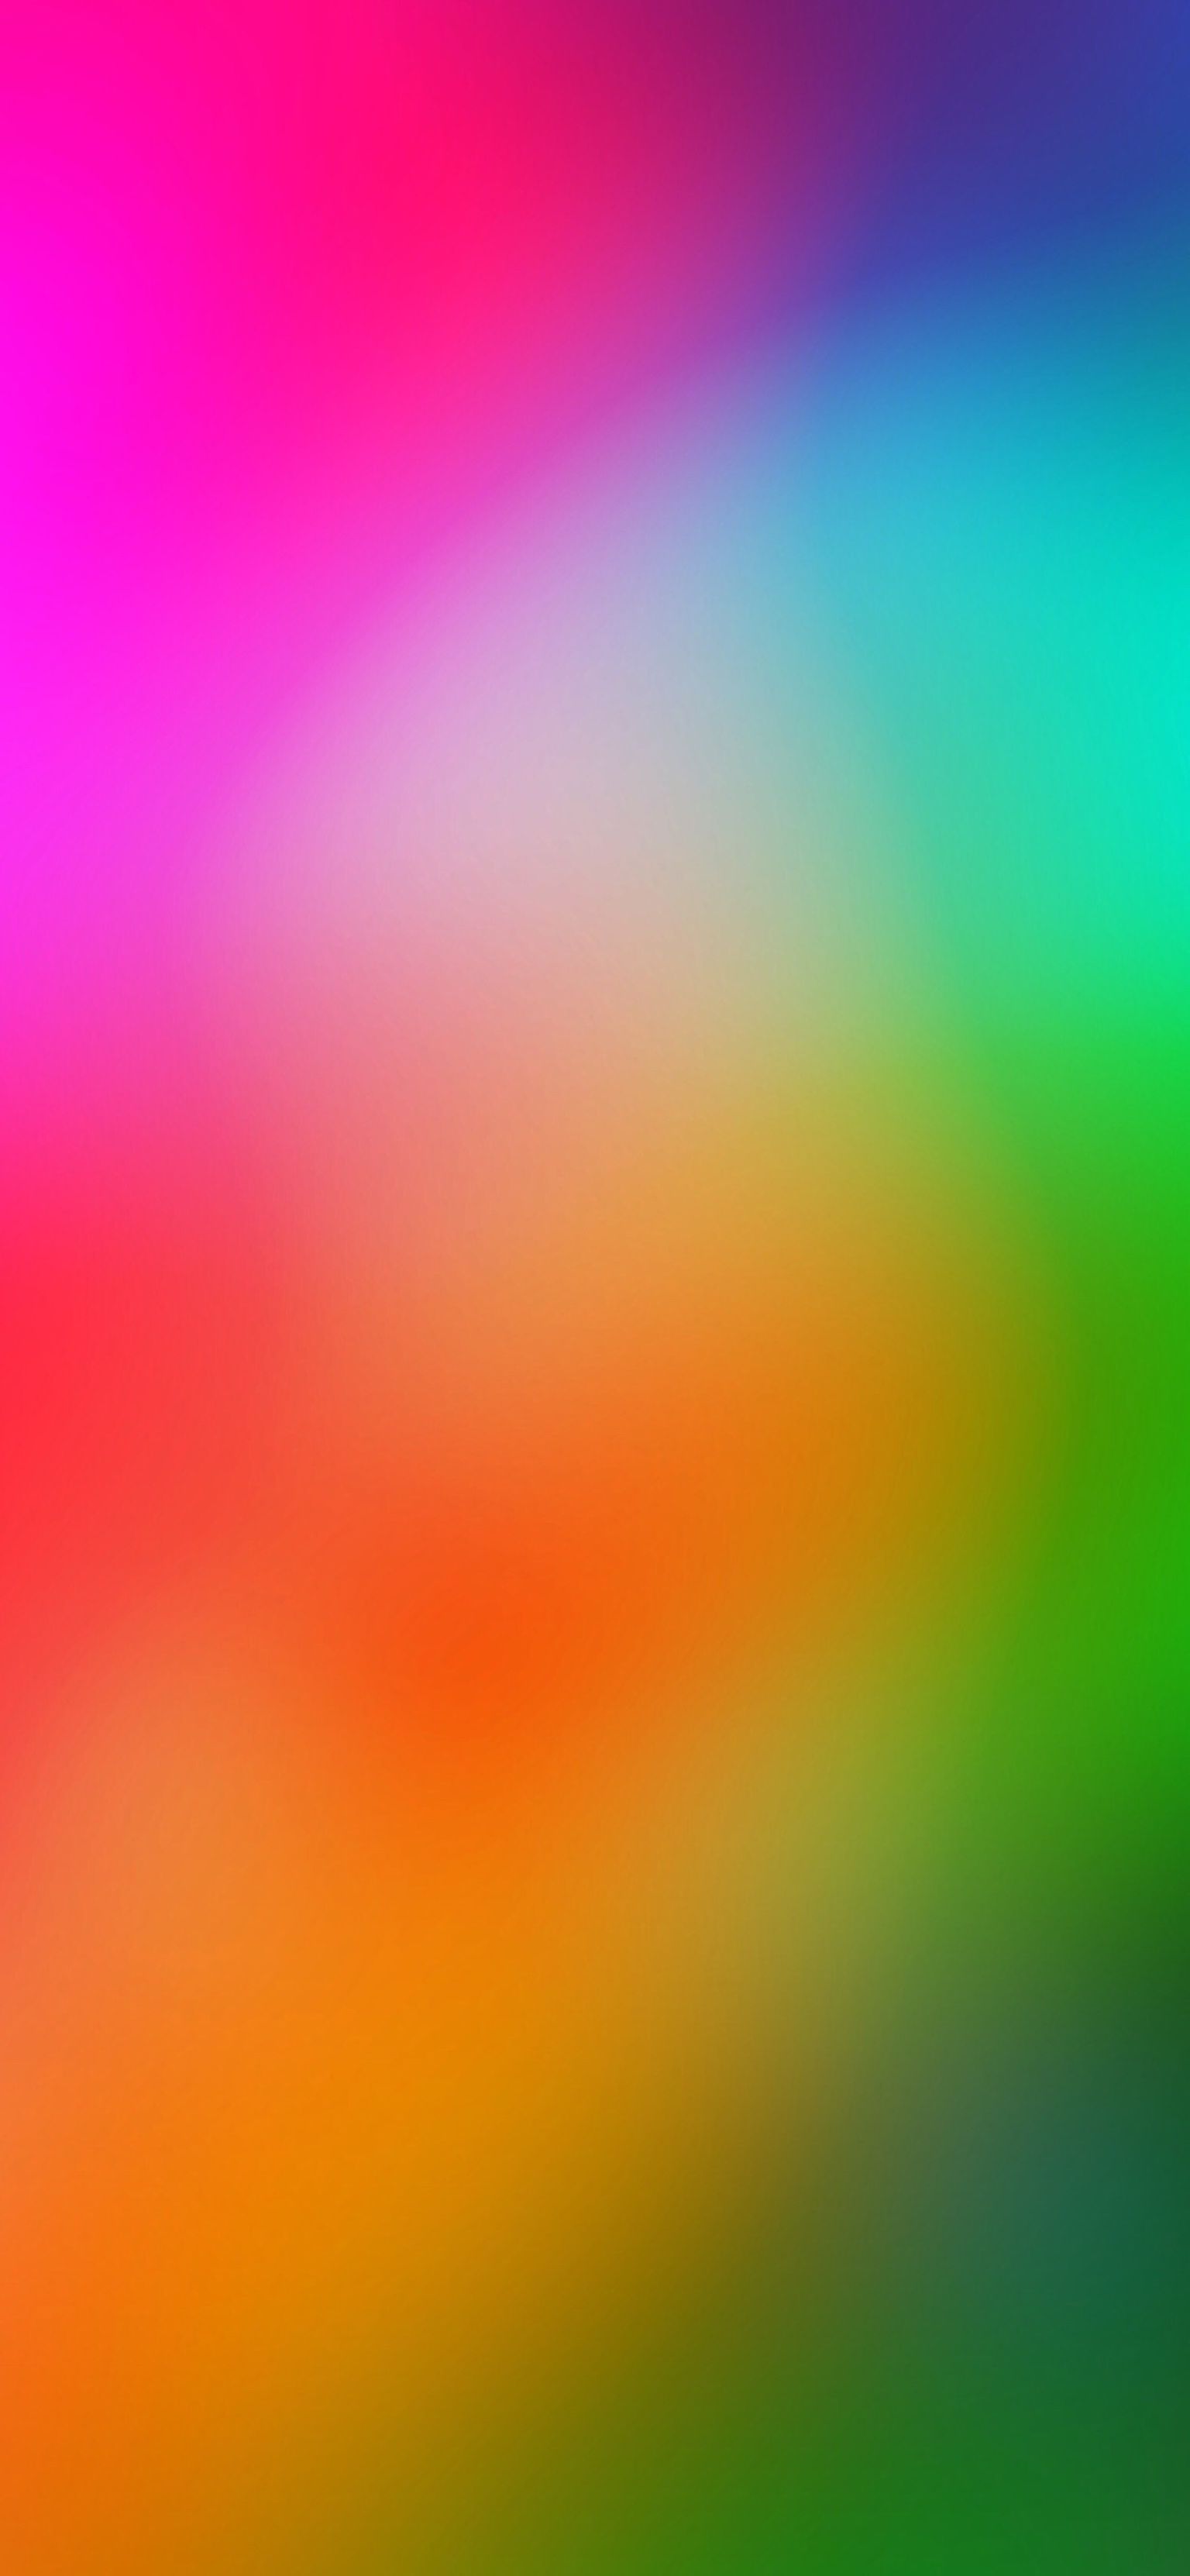 Abstract Colors 4k Ultra HD Wallpaper by Basic Apple Guy